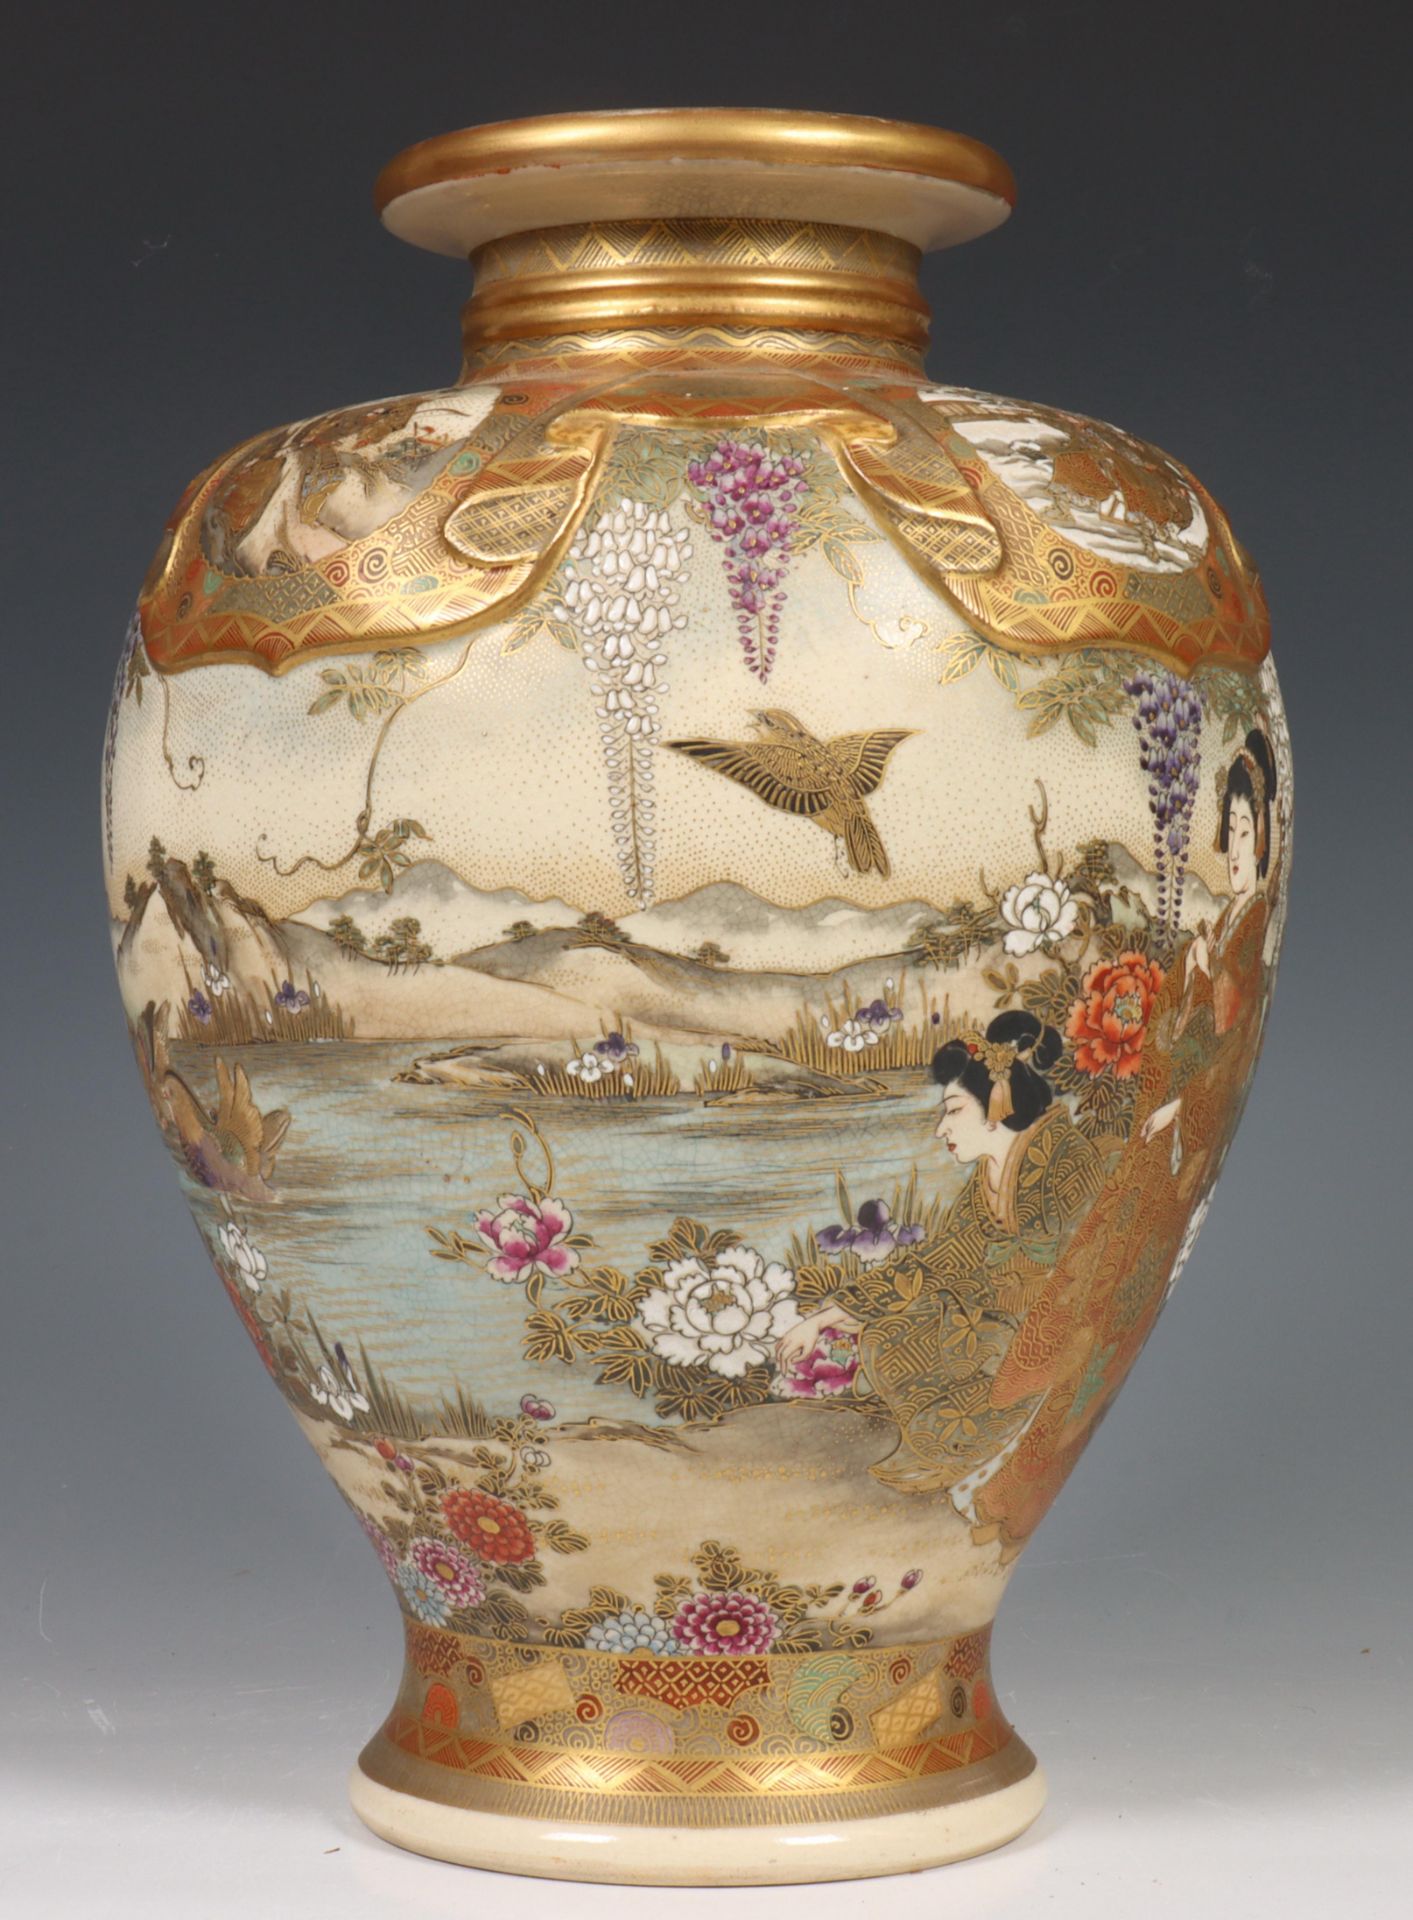 Japan, Satsuma porcelain vase, late 19th century, decorated with elegant ladies in a flower garden - Image 8 of 10